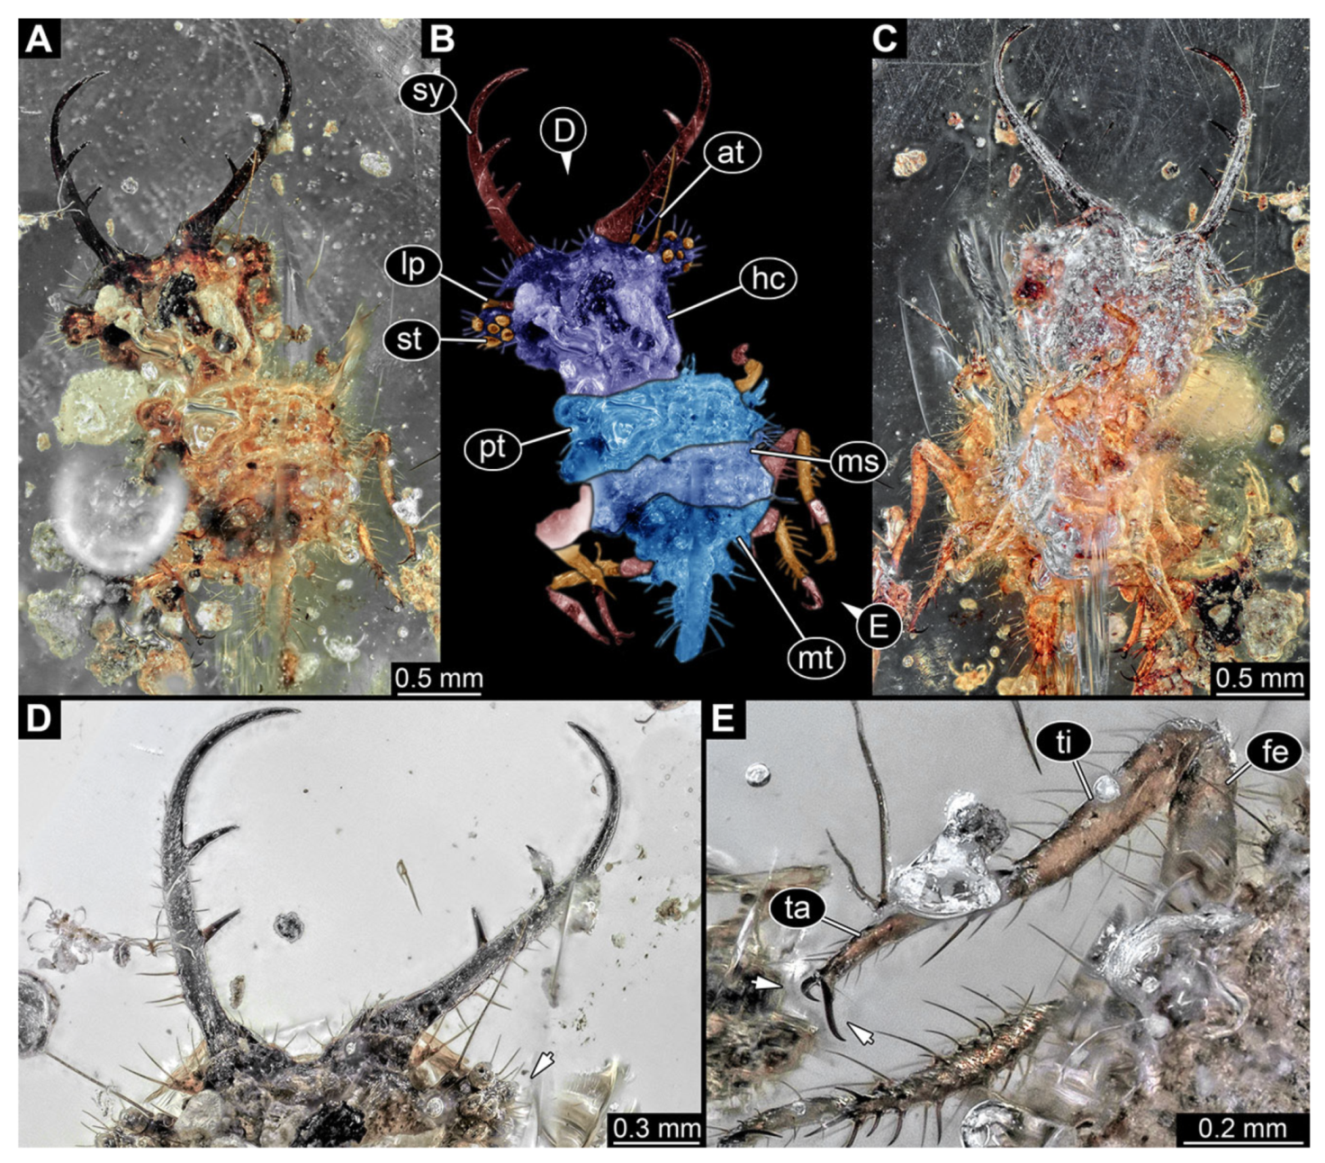 Insects | Free Full-Text | The Morphological Diversity of Antlion Larvae  and Their Closest Relatives over 100 Million Years | HTML